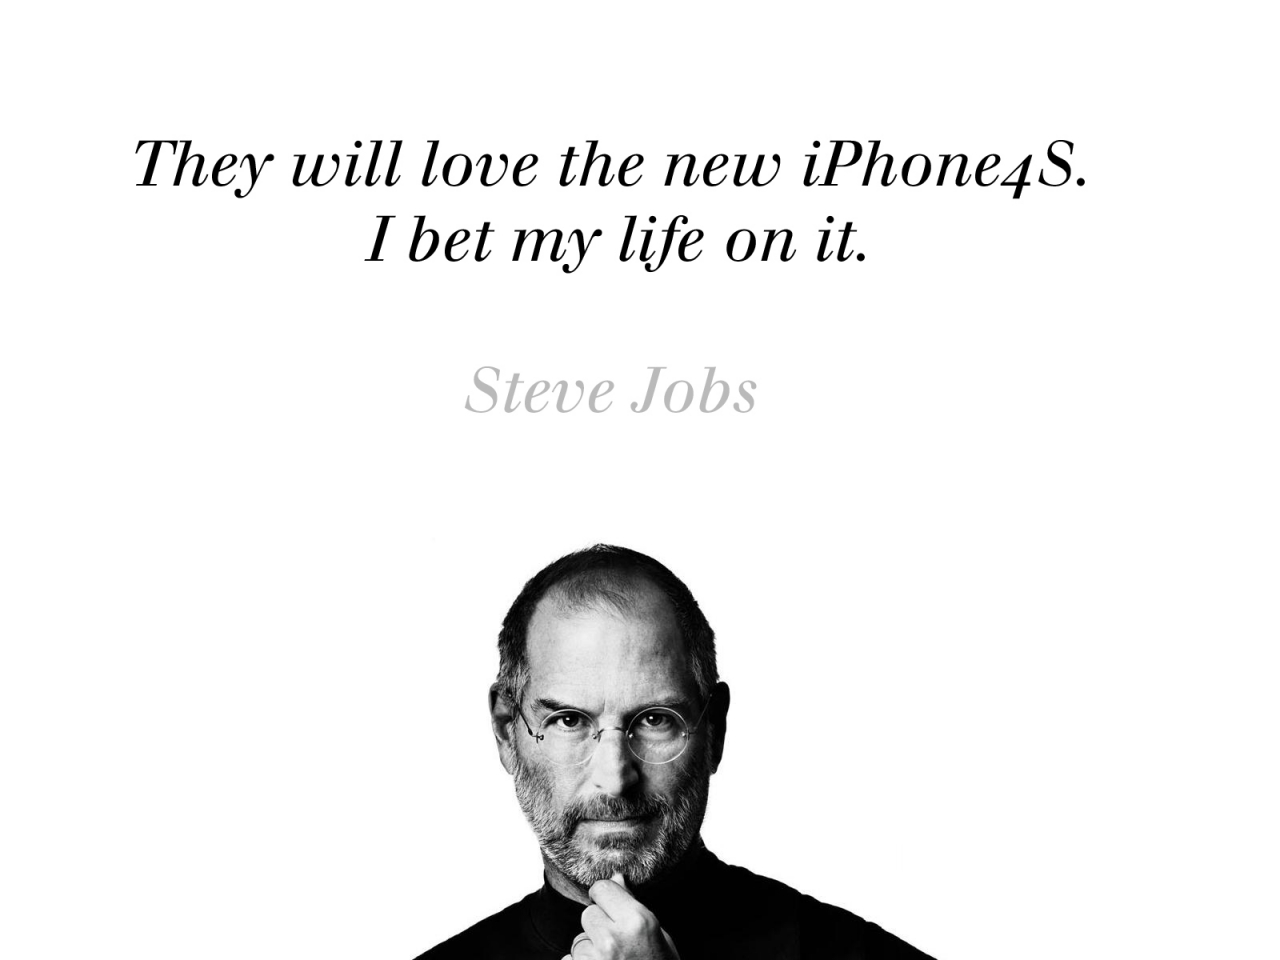 Steve Jobs about iPhone 4S for 1280 x 960 resolution